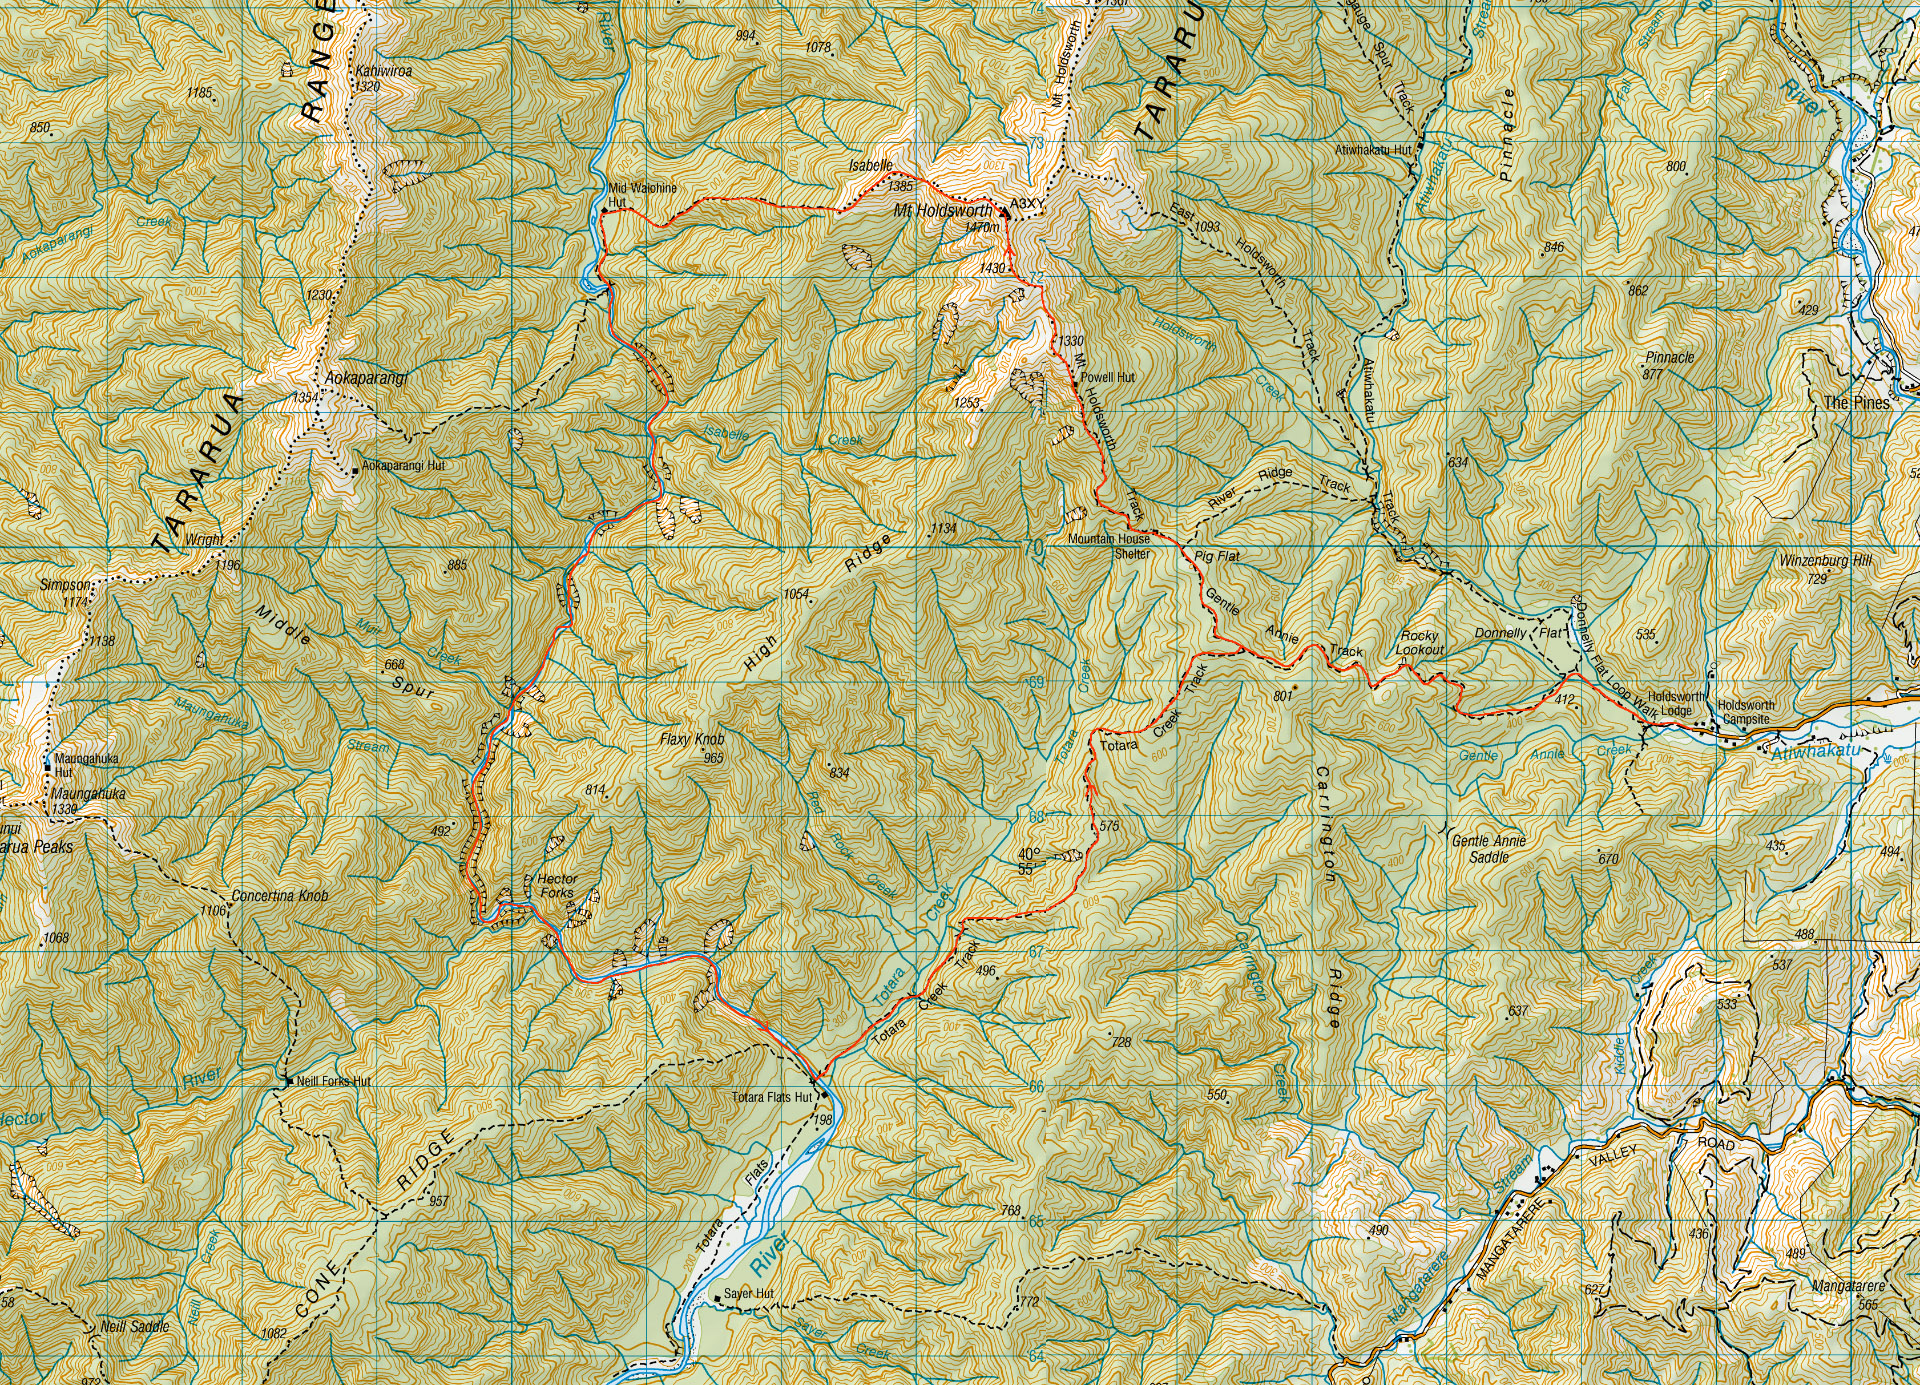 Map of the Waiohine Gorge